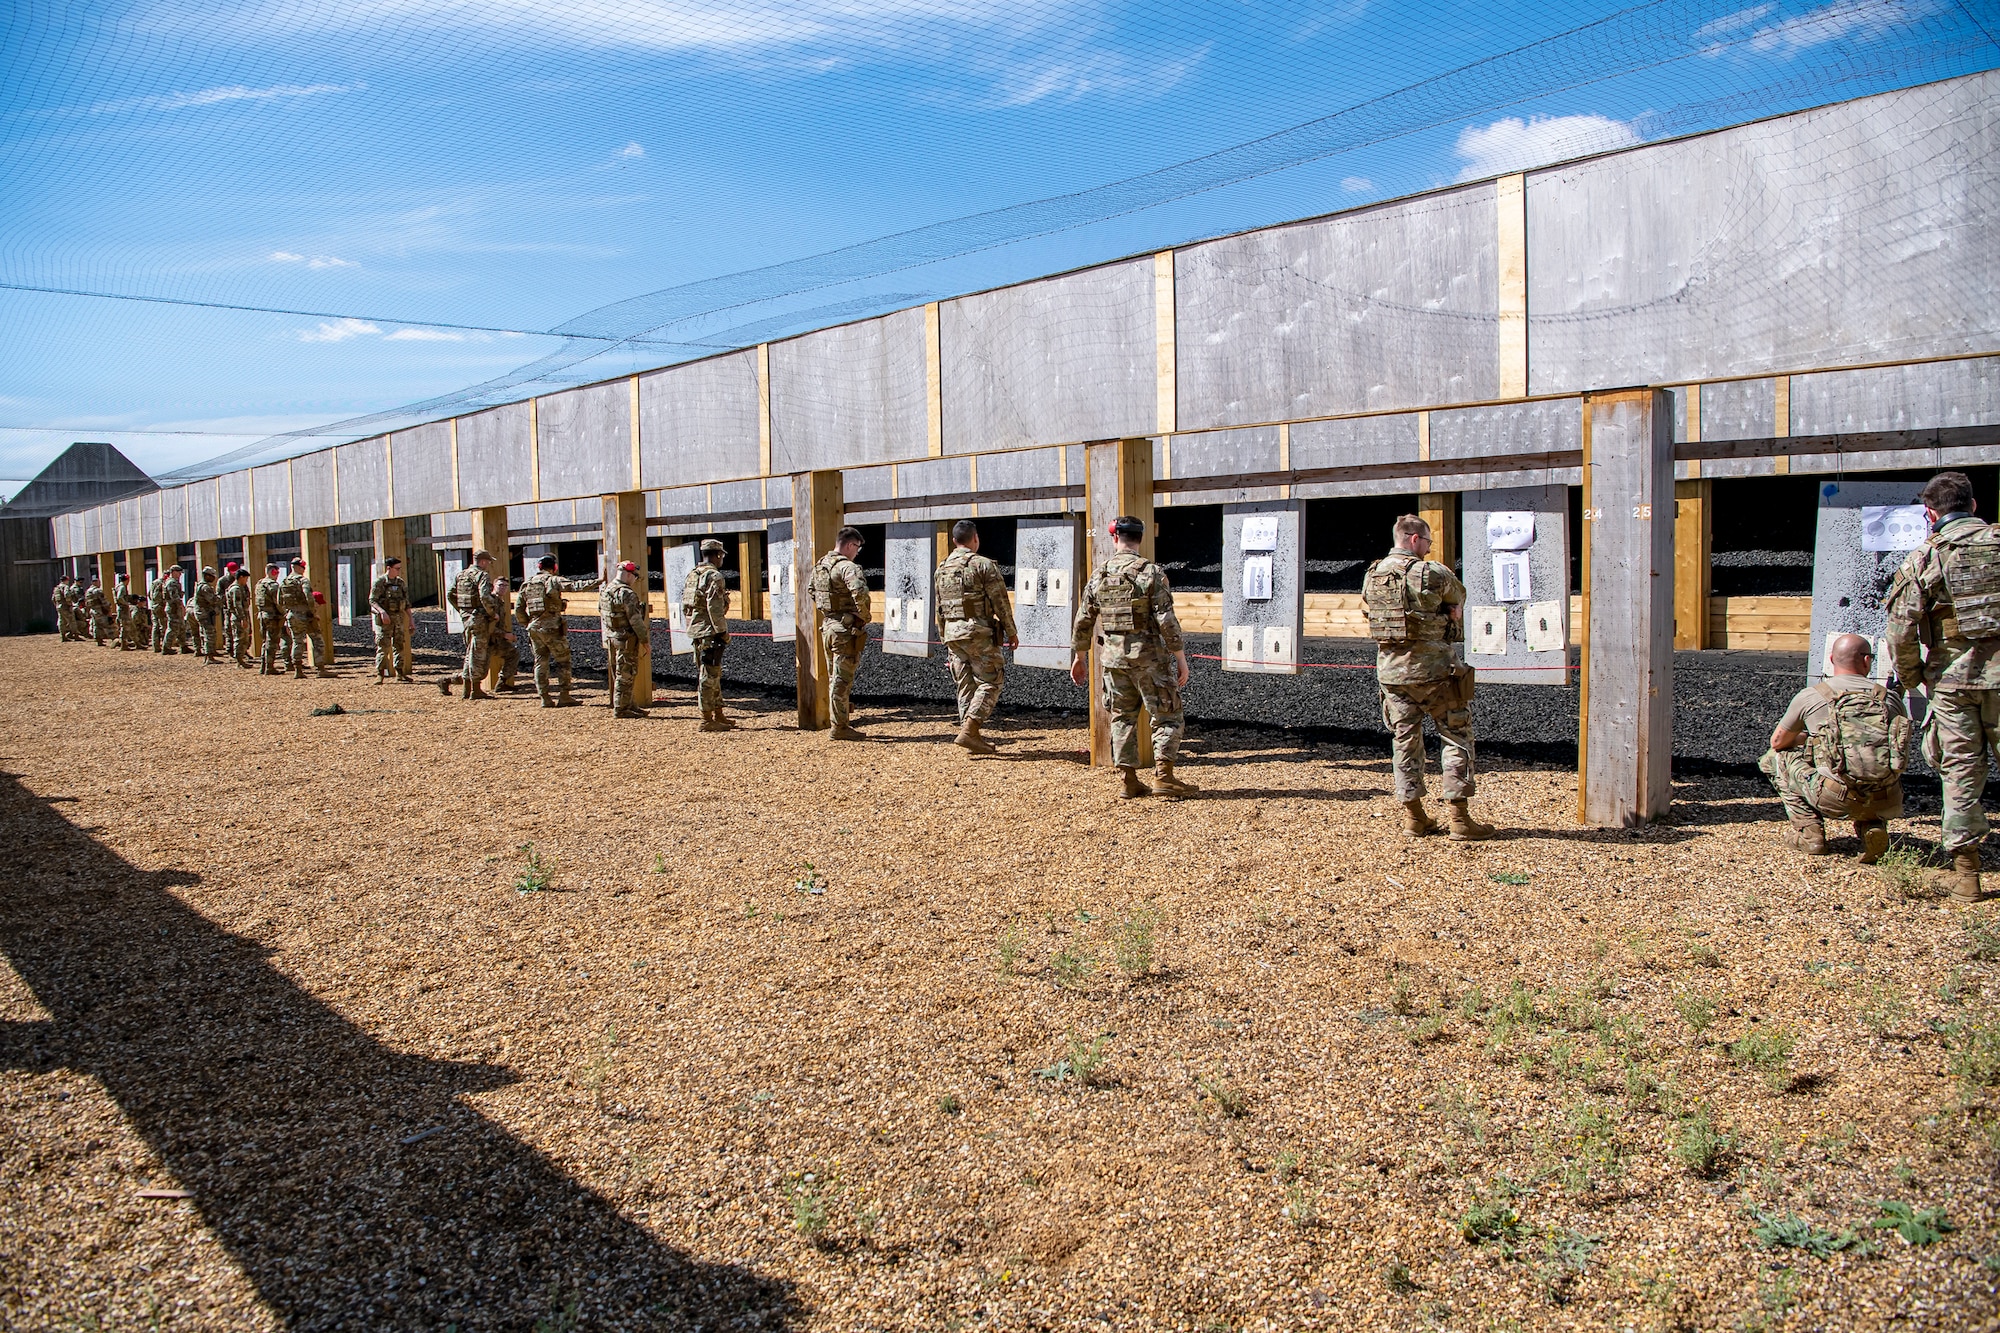 Airmen from the 423d Security Forces Squadron, and their instructors, evaluate score sheets during a proficiency course at RAF Molesworth, England, Aug. 19, 2022. During the course instructors from the 820th Base Defense Group and 435th Contingency Response Group provided oversight and guidance to help critique and advance the combat arms skills of the defenders from the 423d SFS. (U.S. Air Force photo by Staff Sgt. Eugene Oliver)